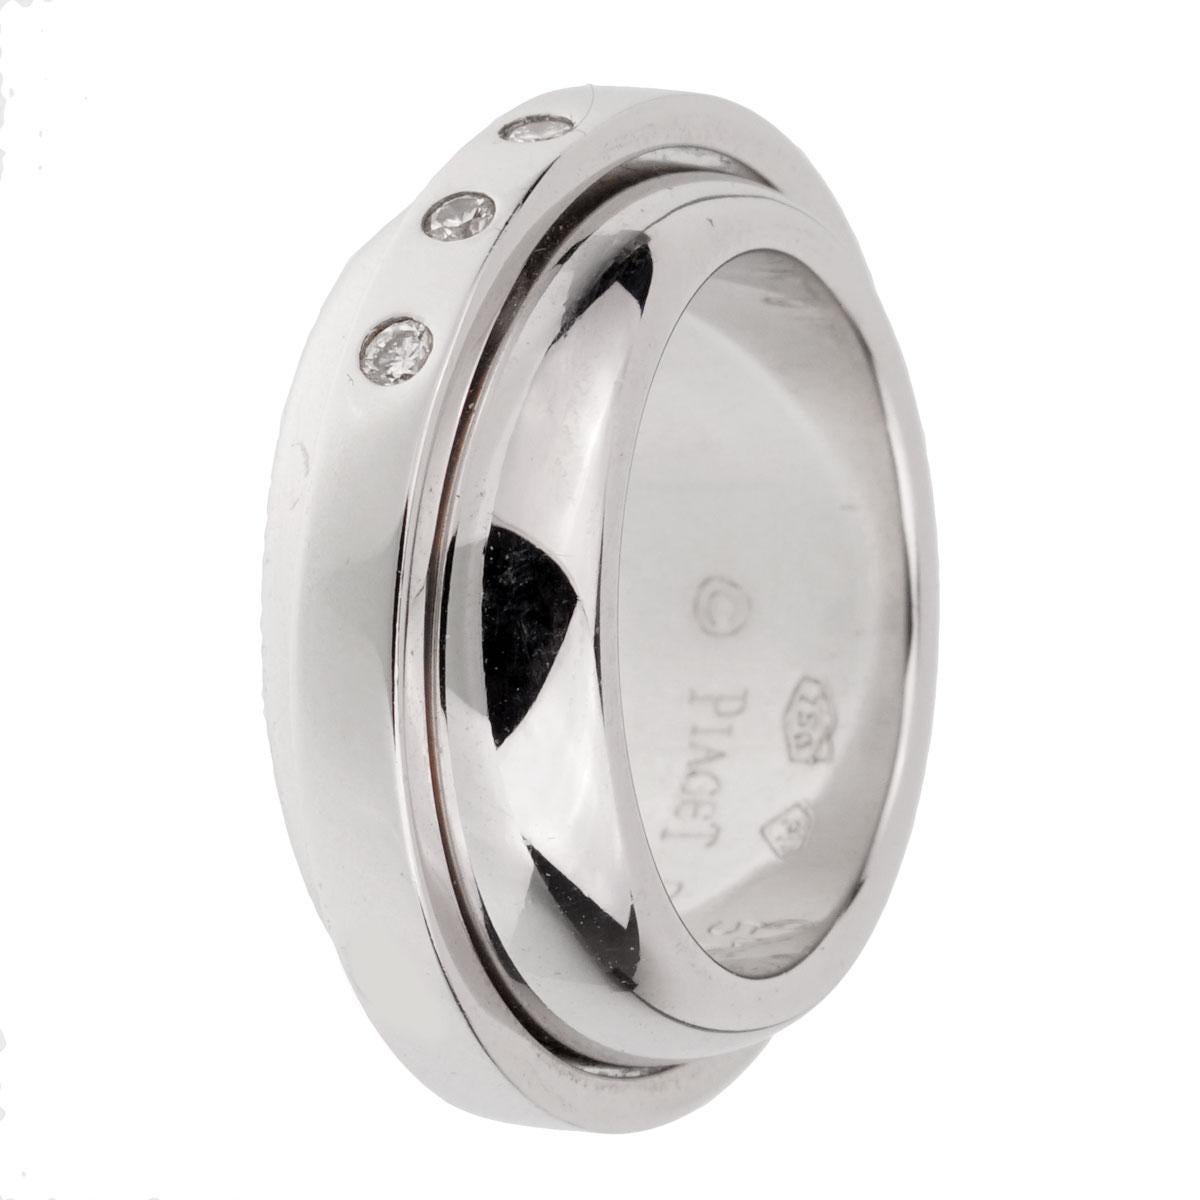 A chic Piaget Possession double band style ring crafted in 18k white gold, the ring features 3 round brilliant cut diamonds on the upper layer. The ring measures a size 5 1/2

Sku: 1922